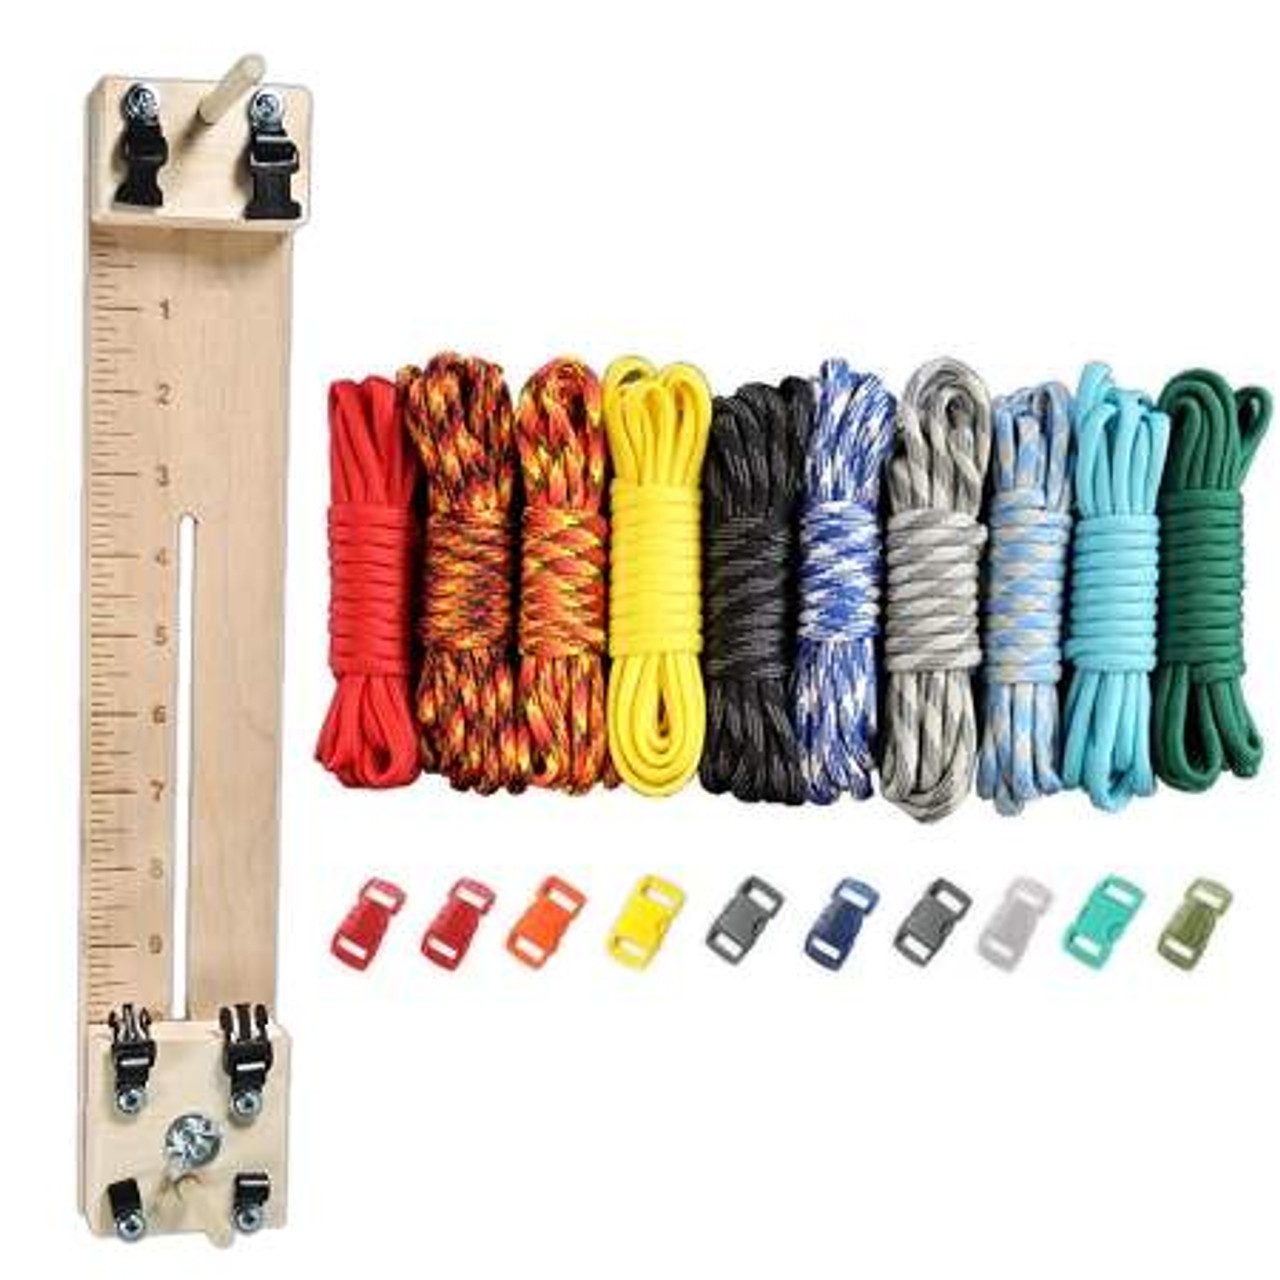 Paracord Combo Crafting Kit with a 10 Pocket Pro Jig - Elements